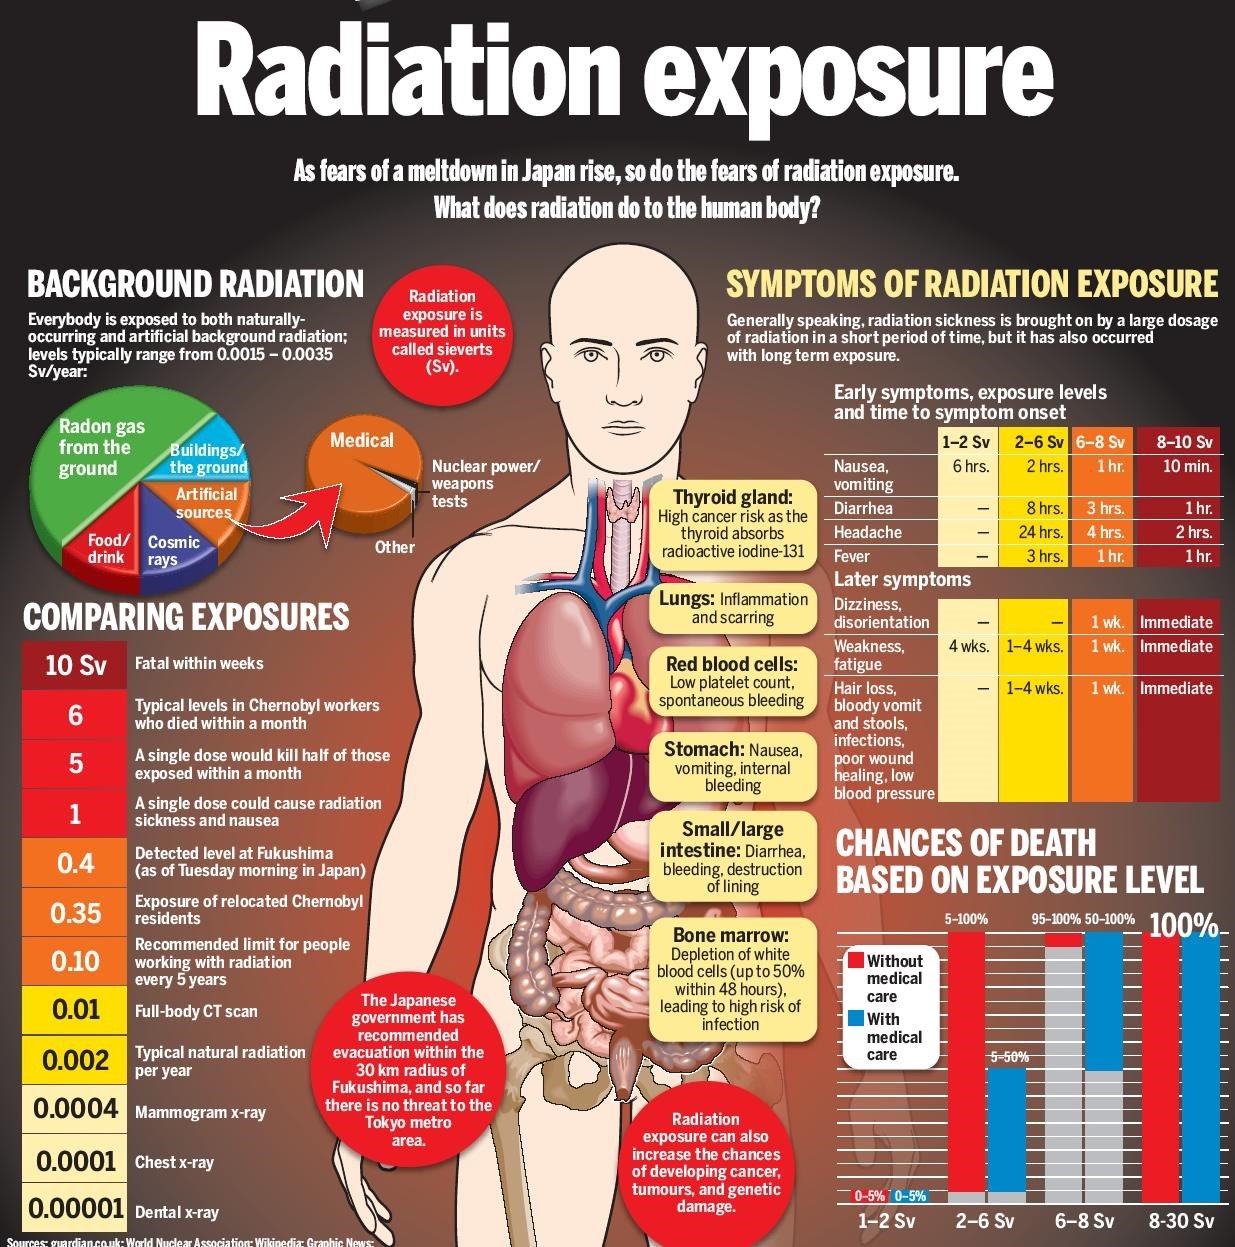 What Effect Does Radiation Have on the Body?